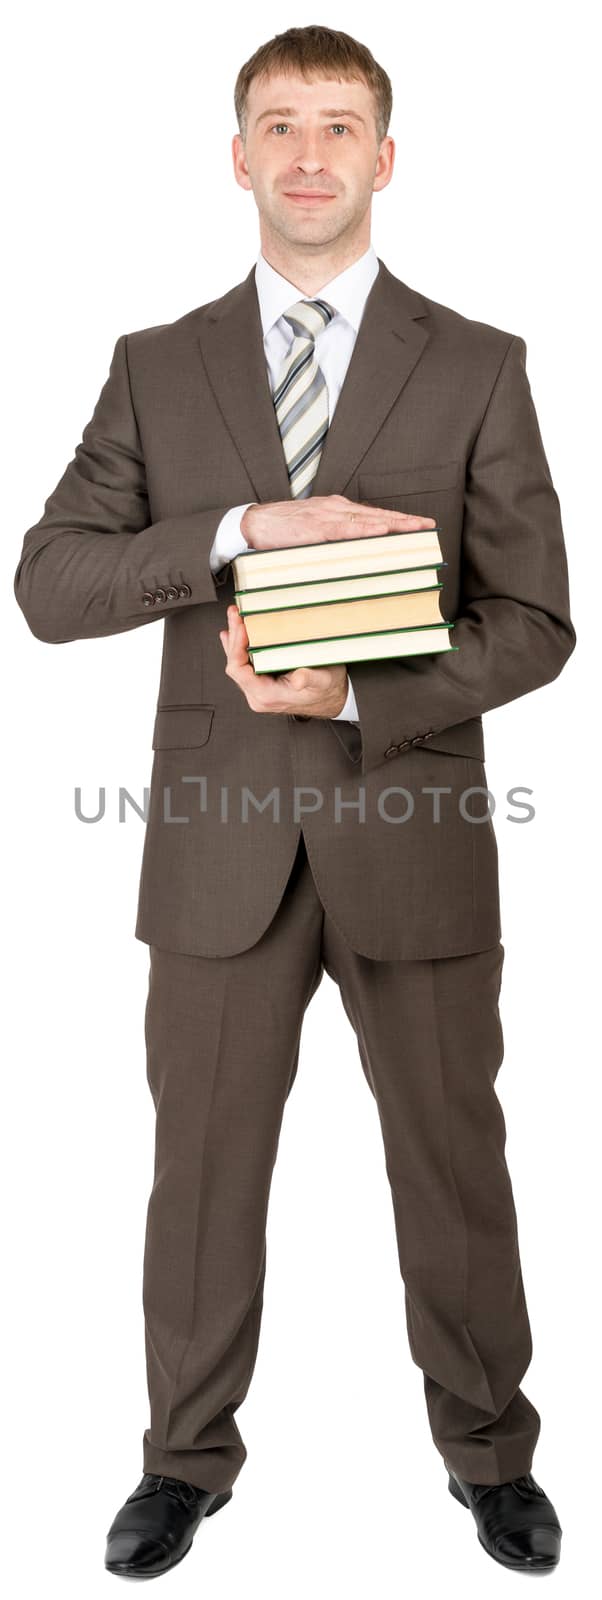 Businessman holding books isolated on white background, front view